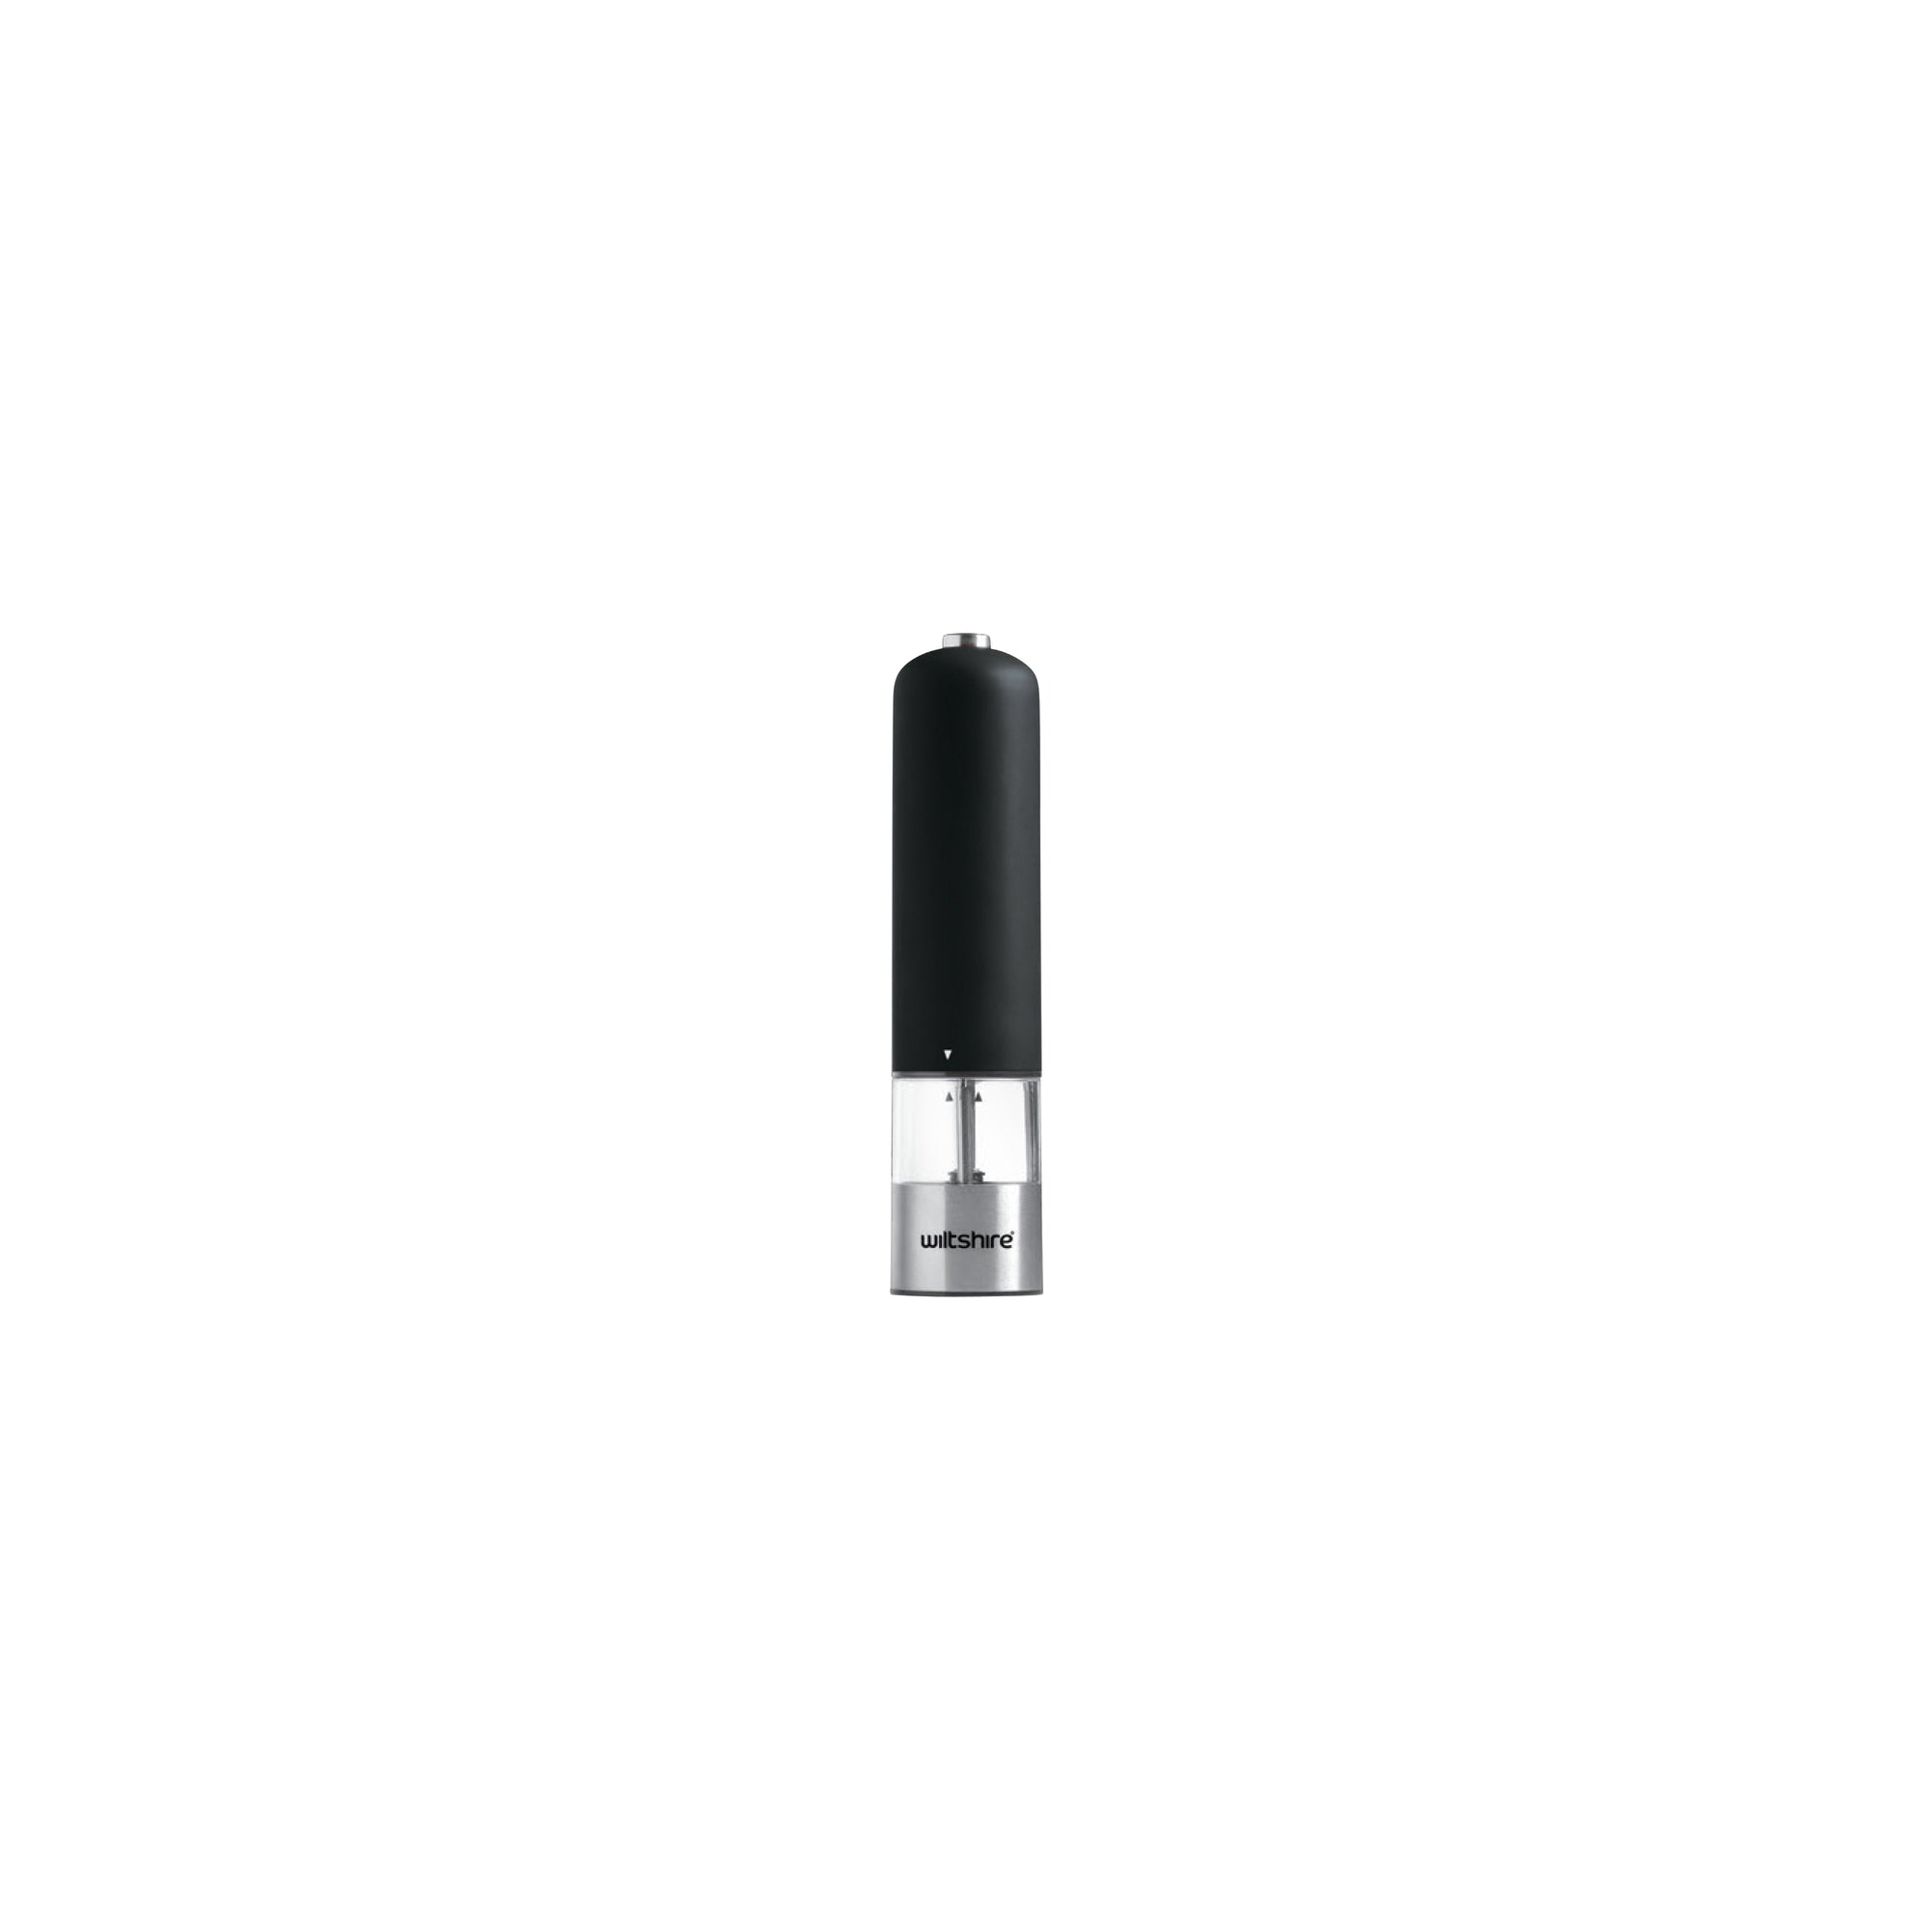 WLT48108 Wiltshire Electric Mill Soft Touch Black Tomkin Australia Hospitality Supplies